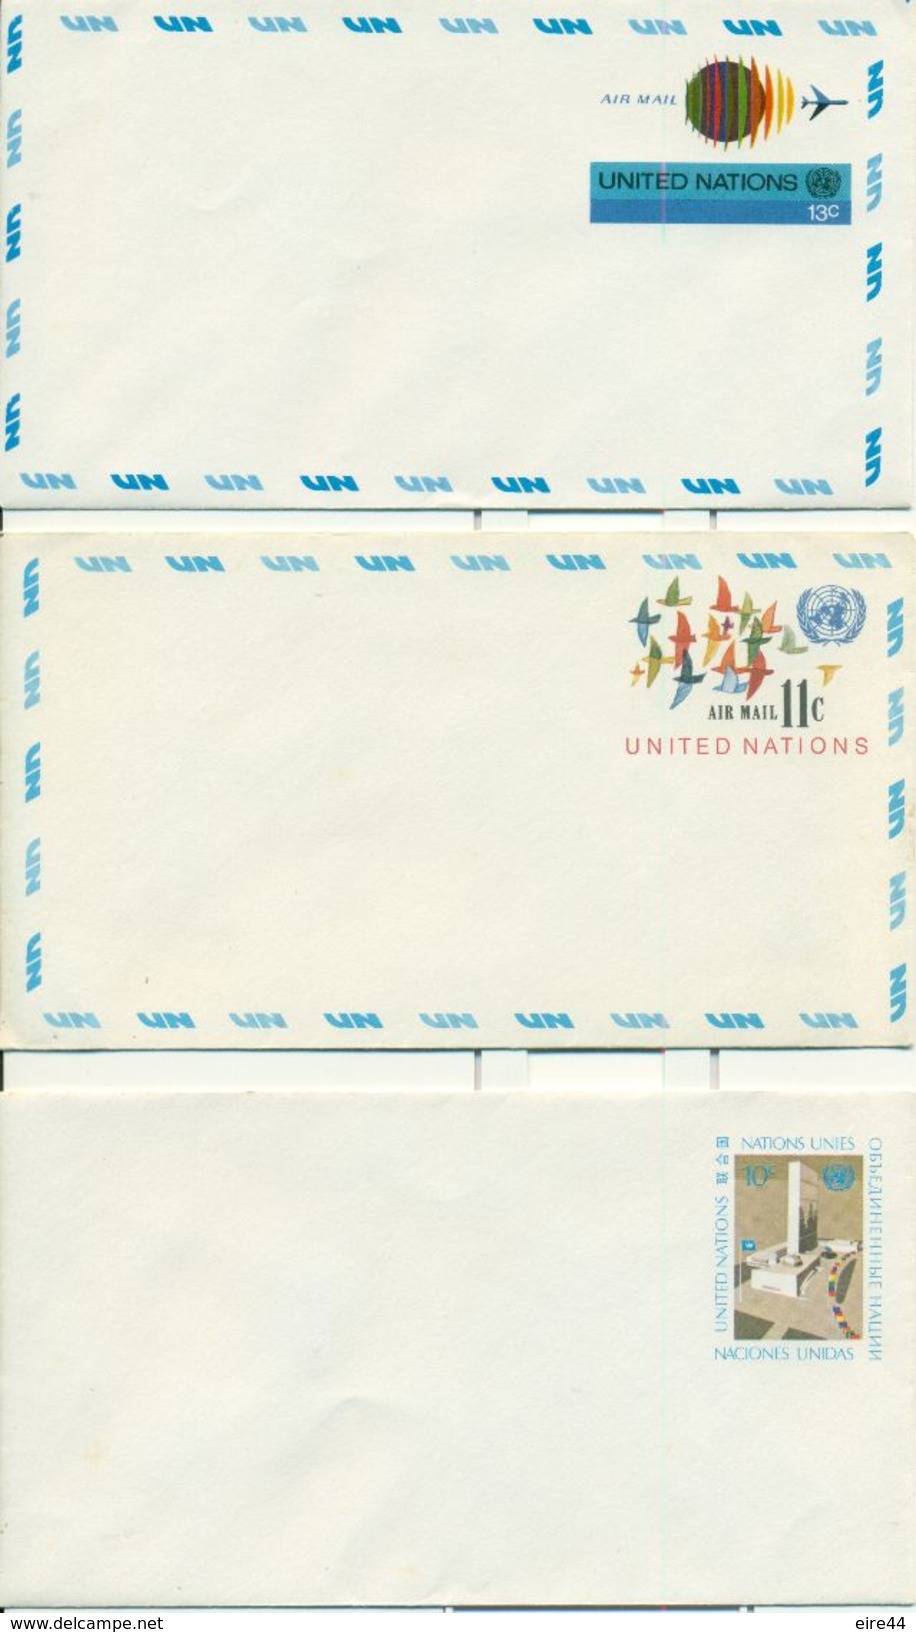 United Nations New York  9  Postcards Mint Airmail Postal Stationery - Luftpost